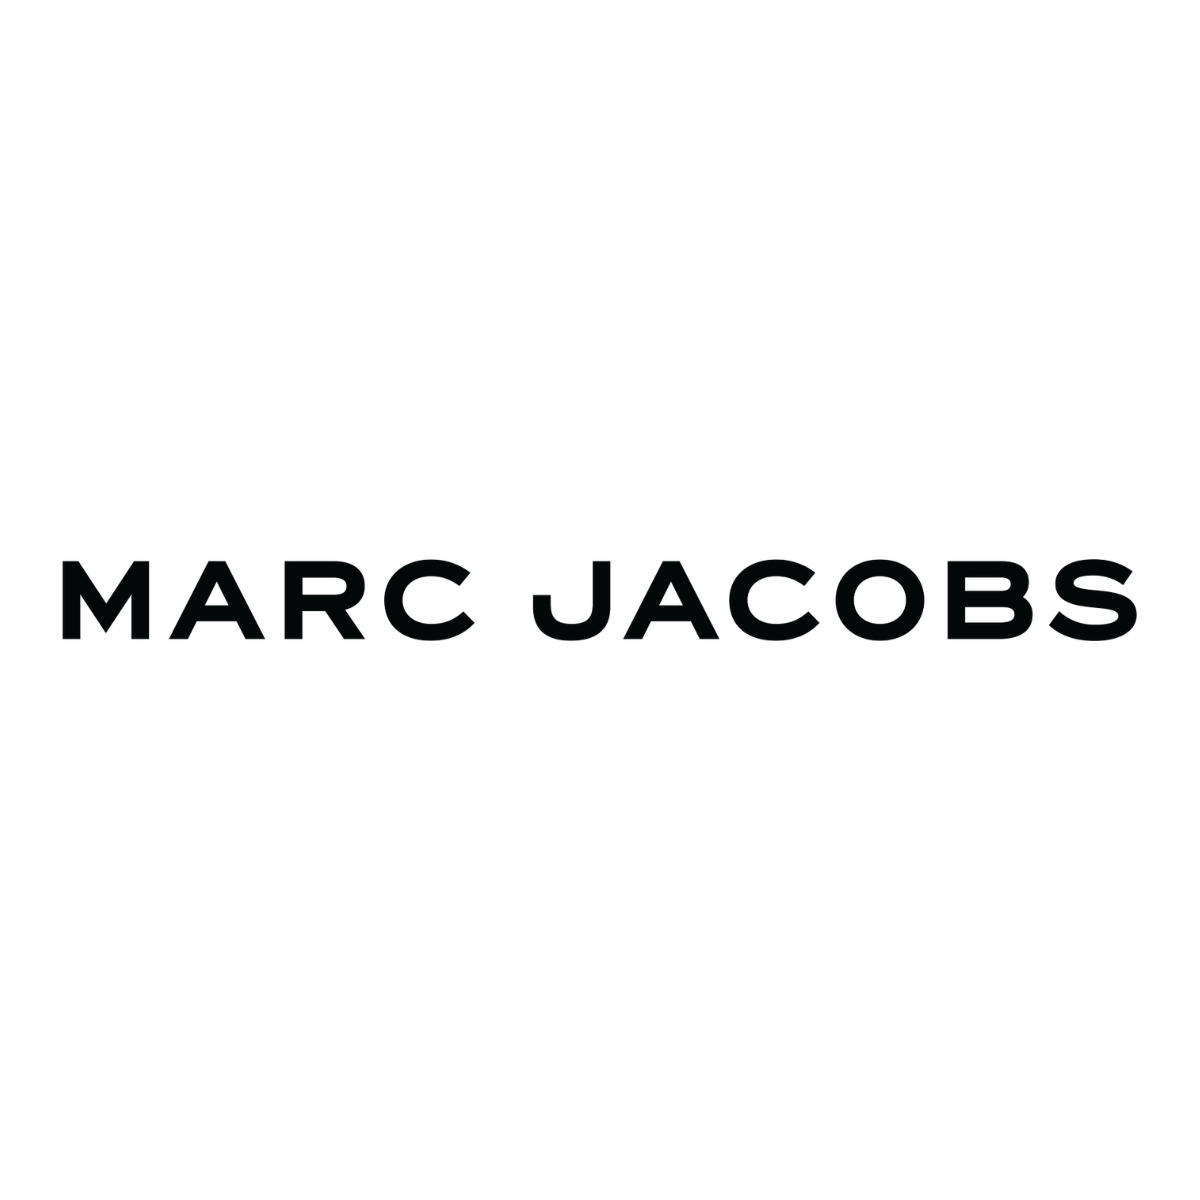 "Explore the fashionable realm of Marc Jacobs eyewear at Optorium"